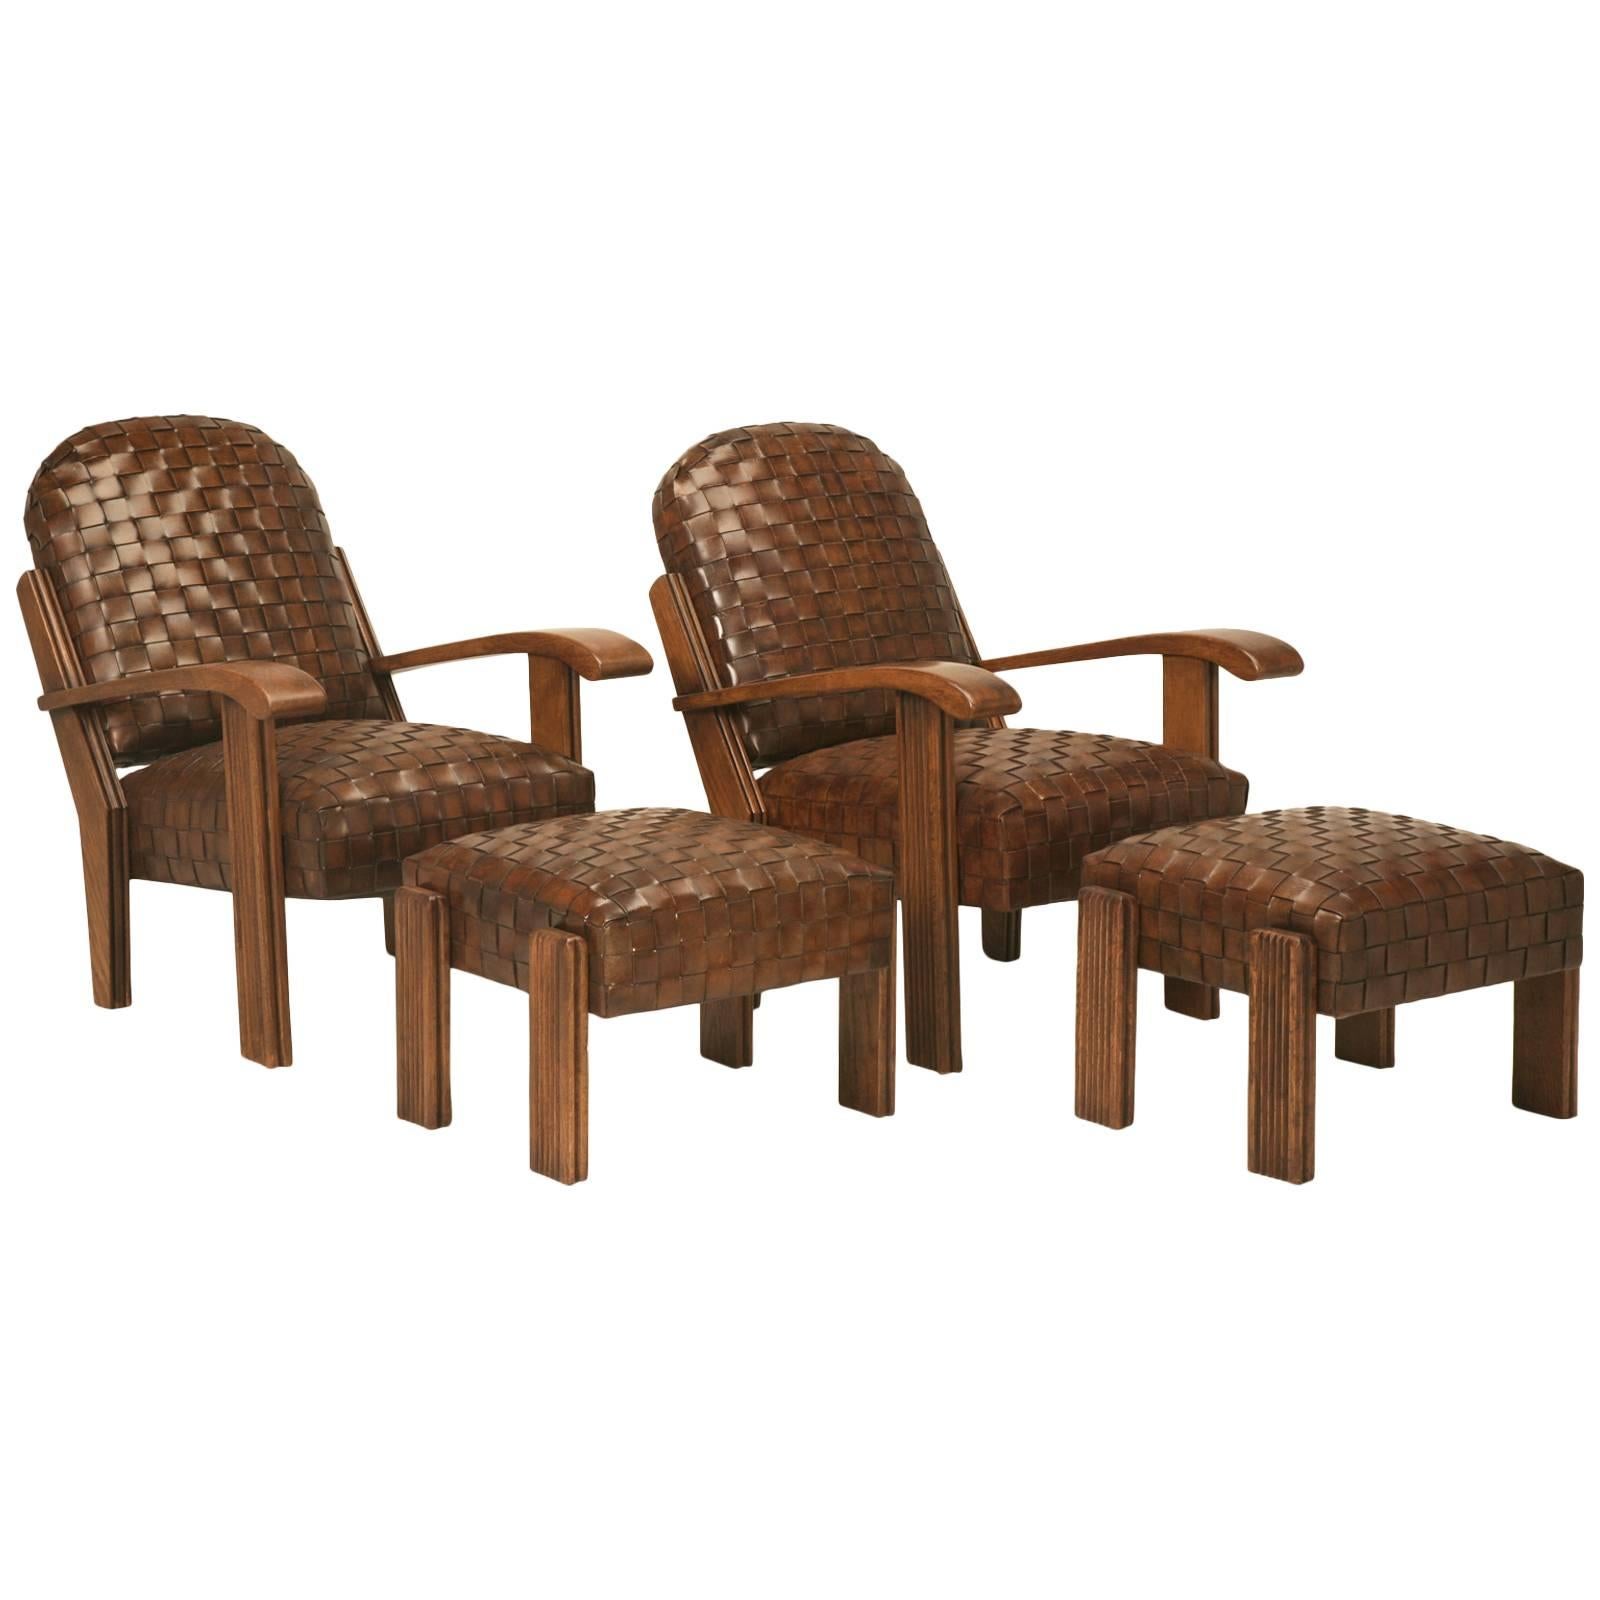  French Woven Leather Club Chairs with Matching Ottomans Available in any Color